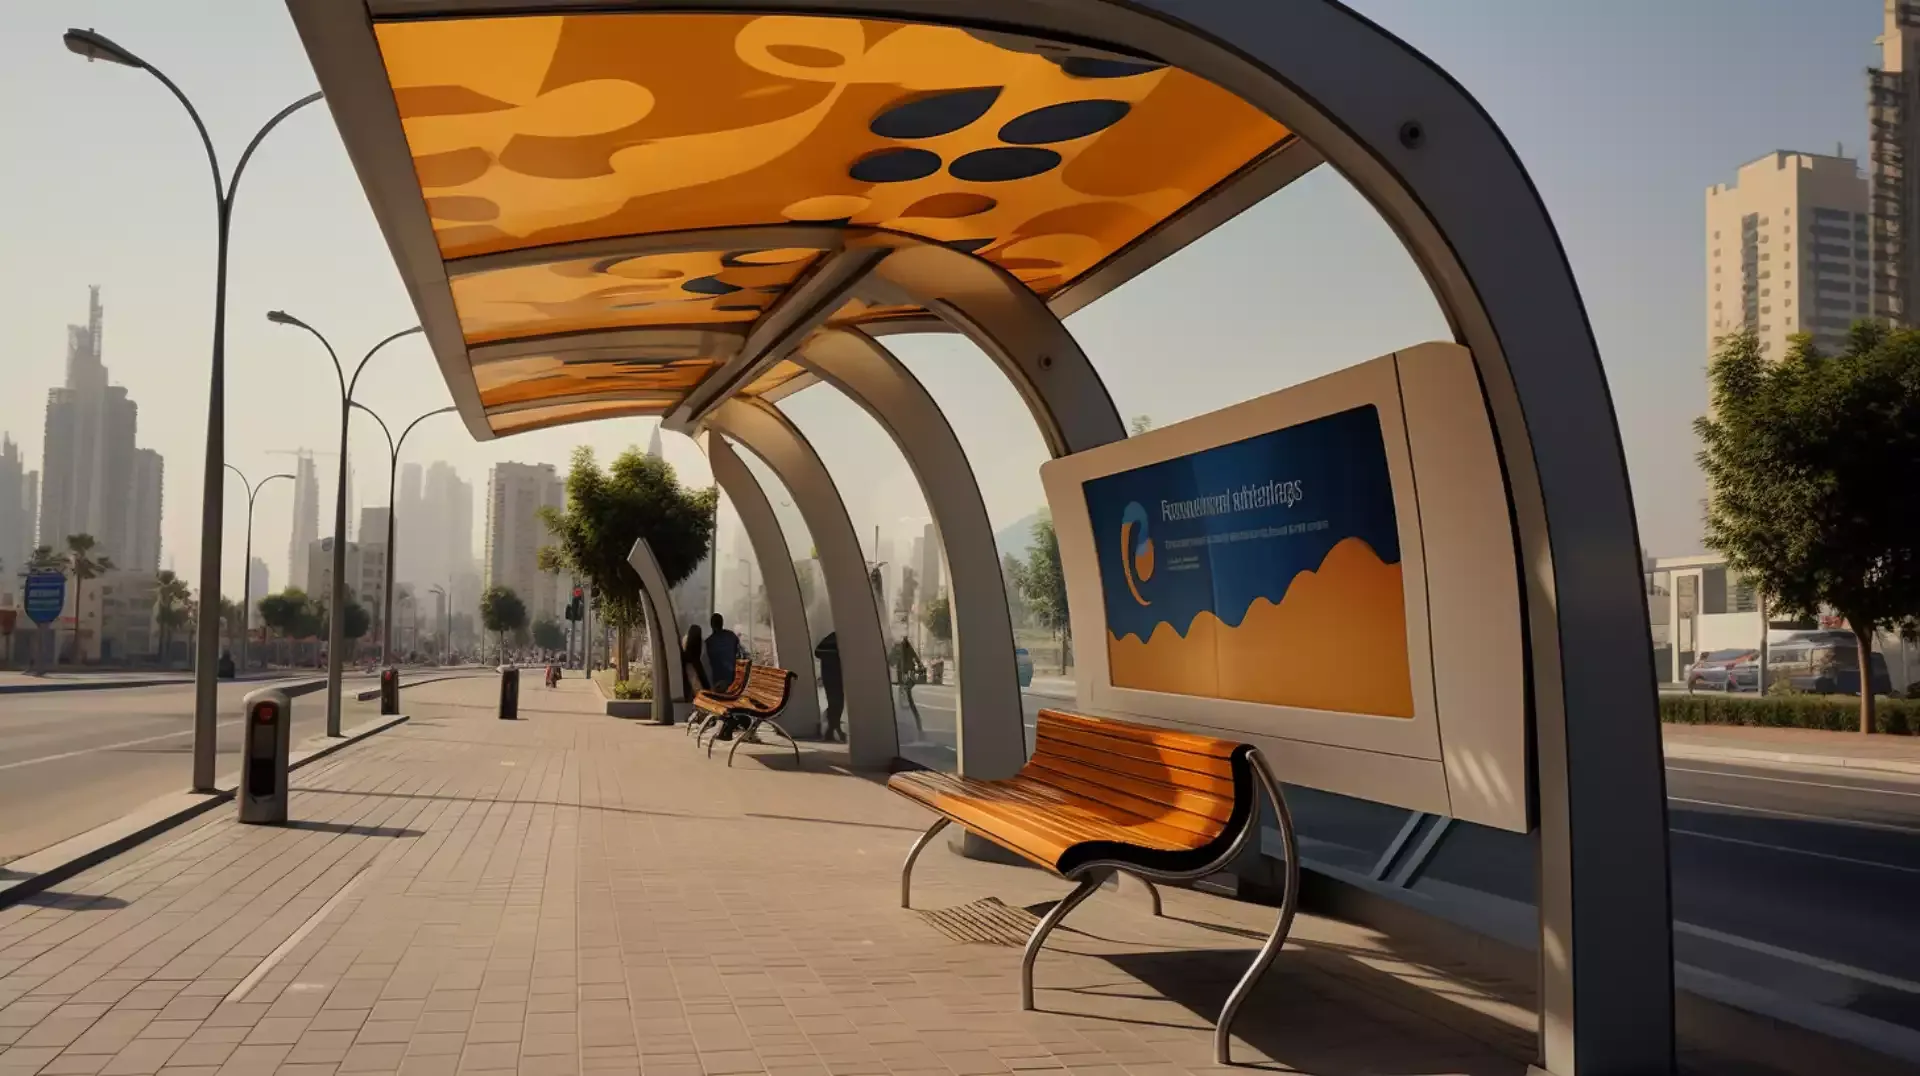 Accessible Transit: Public Transport in Silicon Oasis